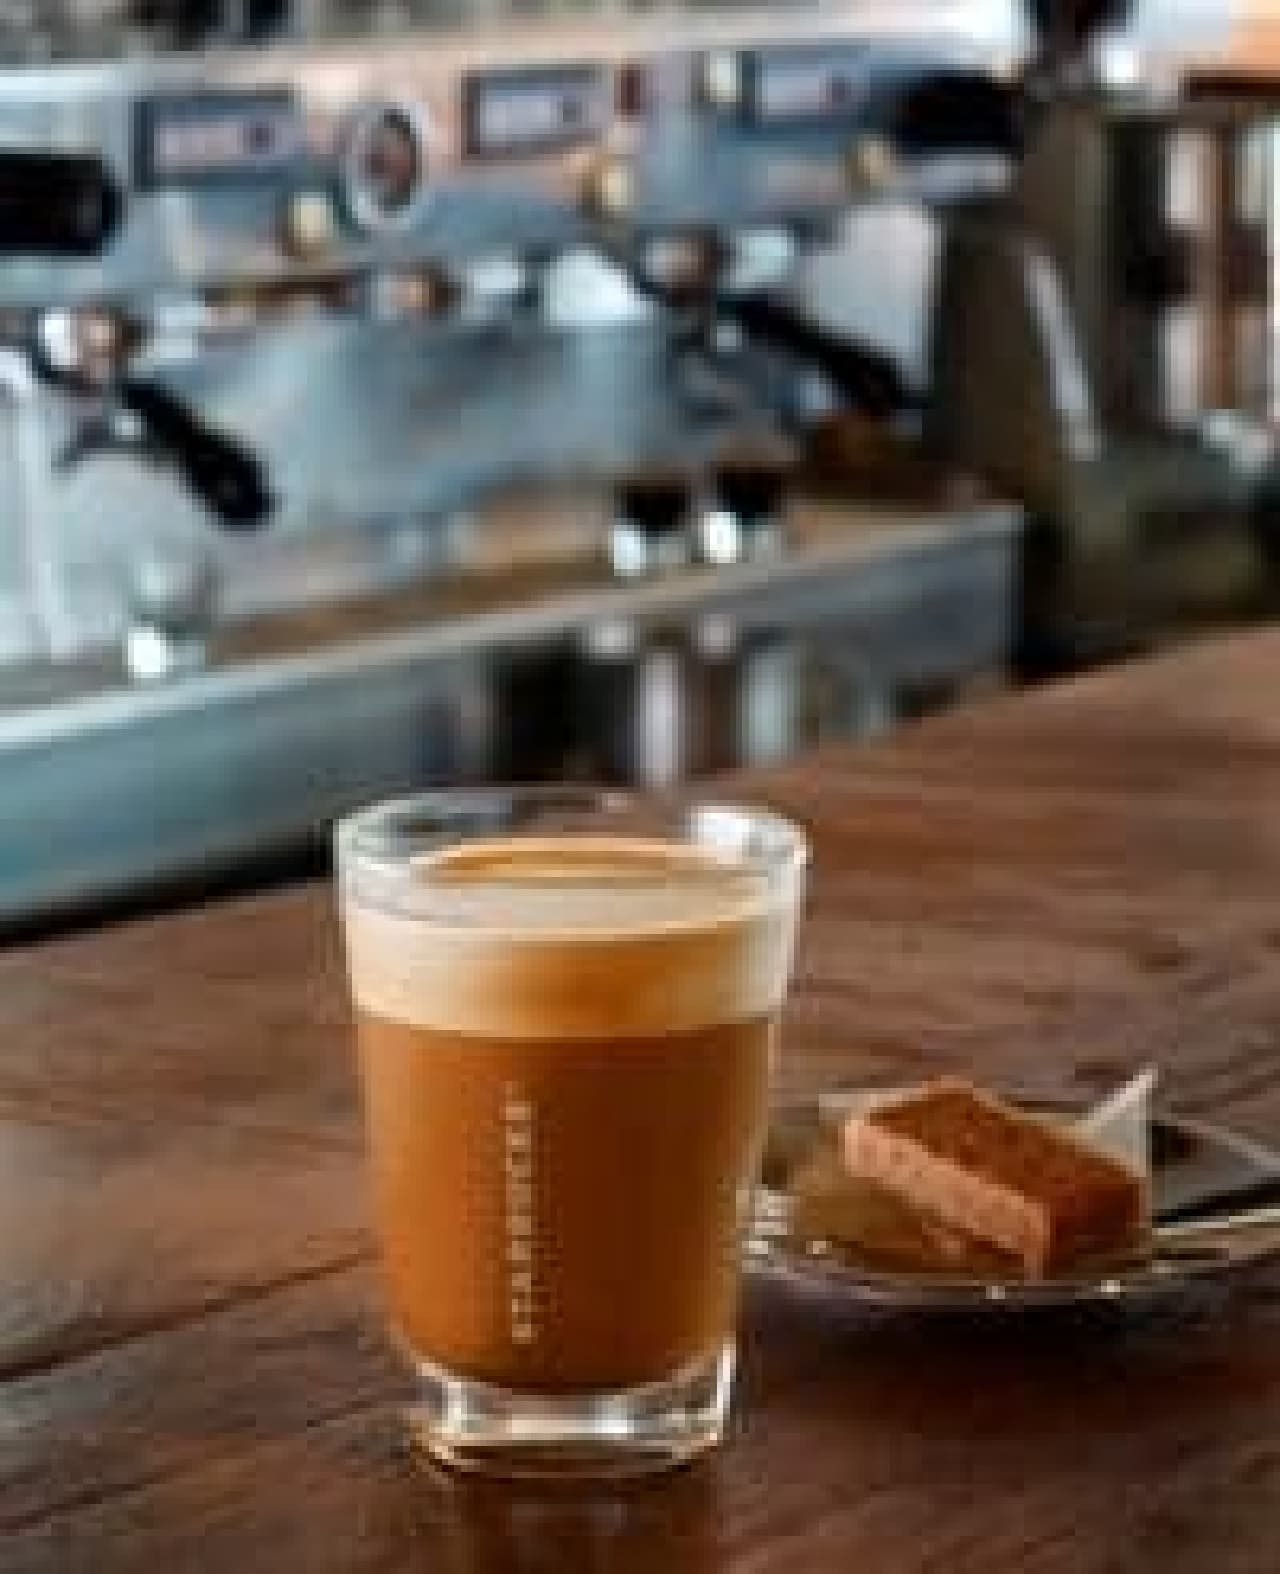 "Authentic espresso" to enjoy with a special shot glass